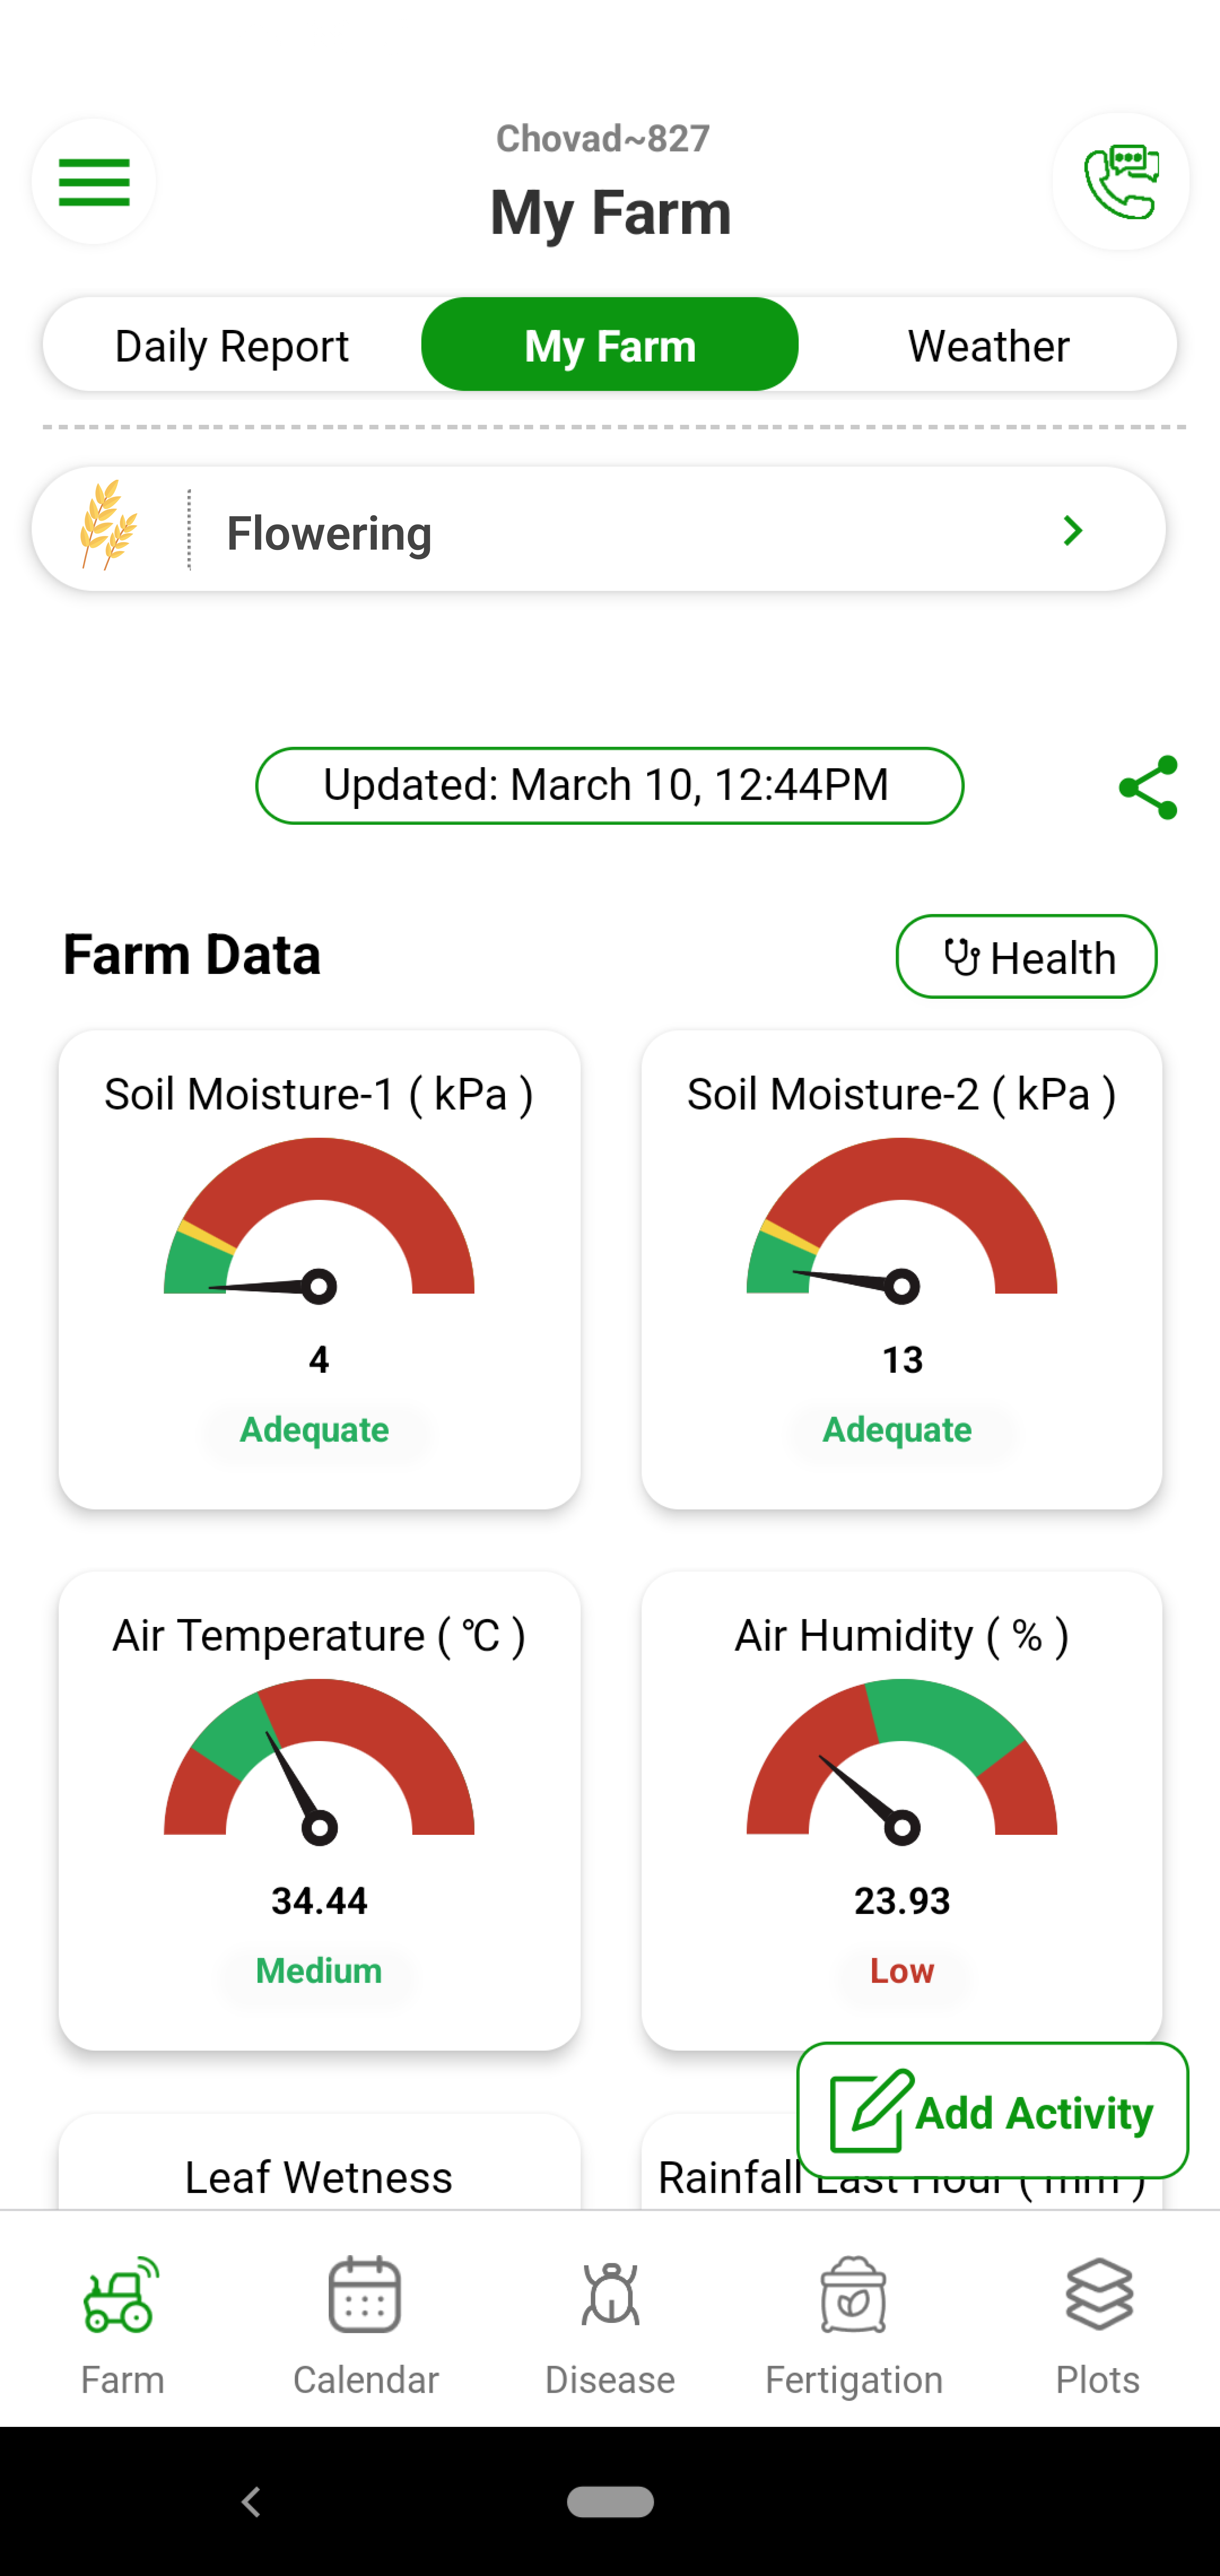 Fyllo device installed at your farm monitors your farm 24*7 and captures 12 critical parameters in real time. You get this data on you mobile and dashboard in real time. You get to monitor where the crop is getting enough sunlight, proper temperature or humidity.